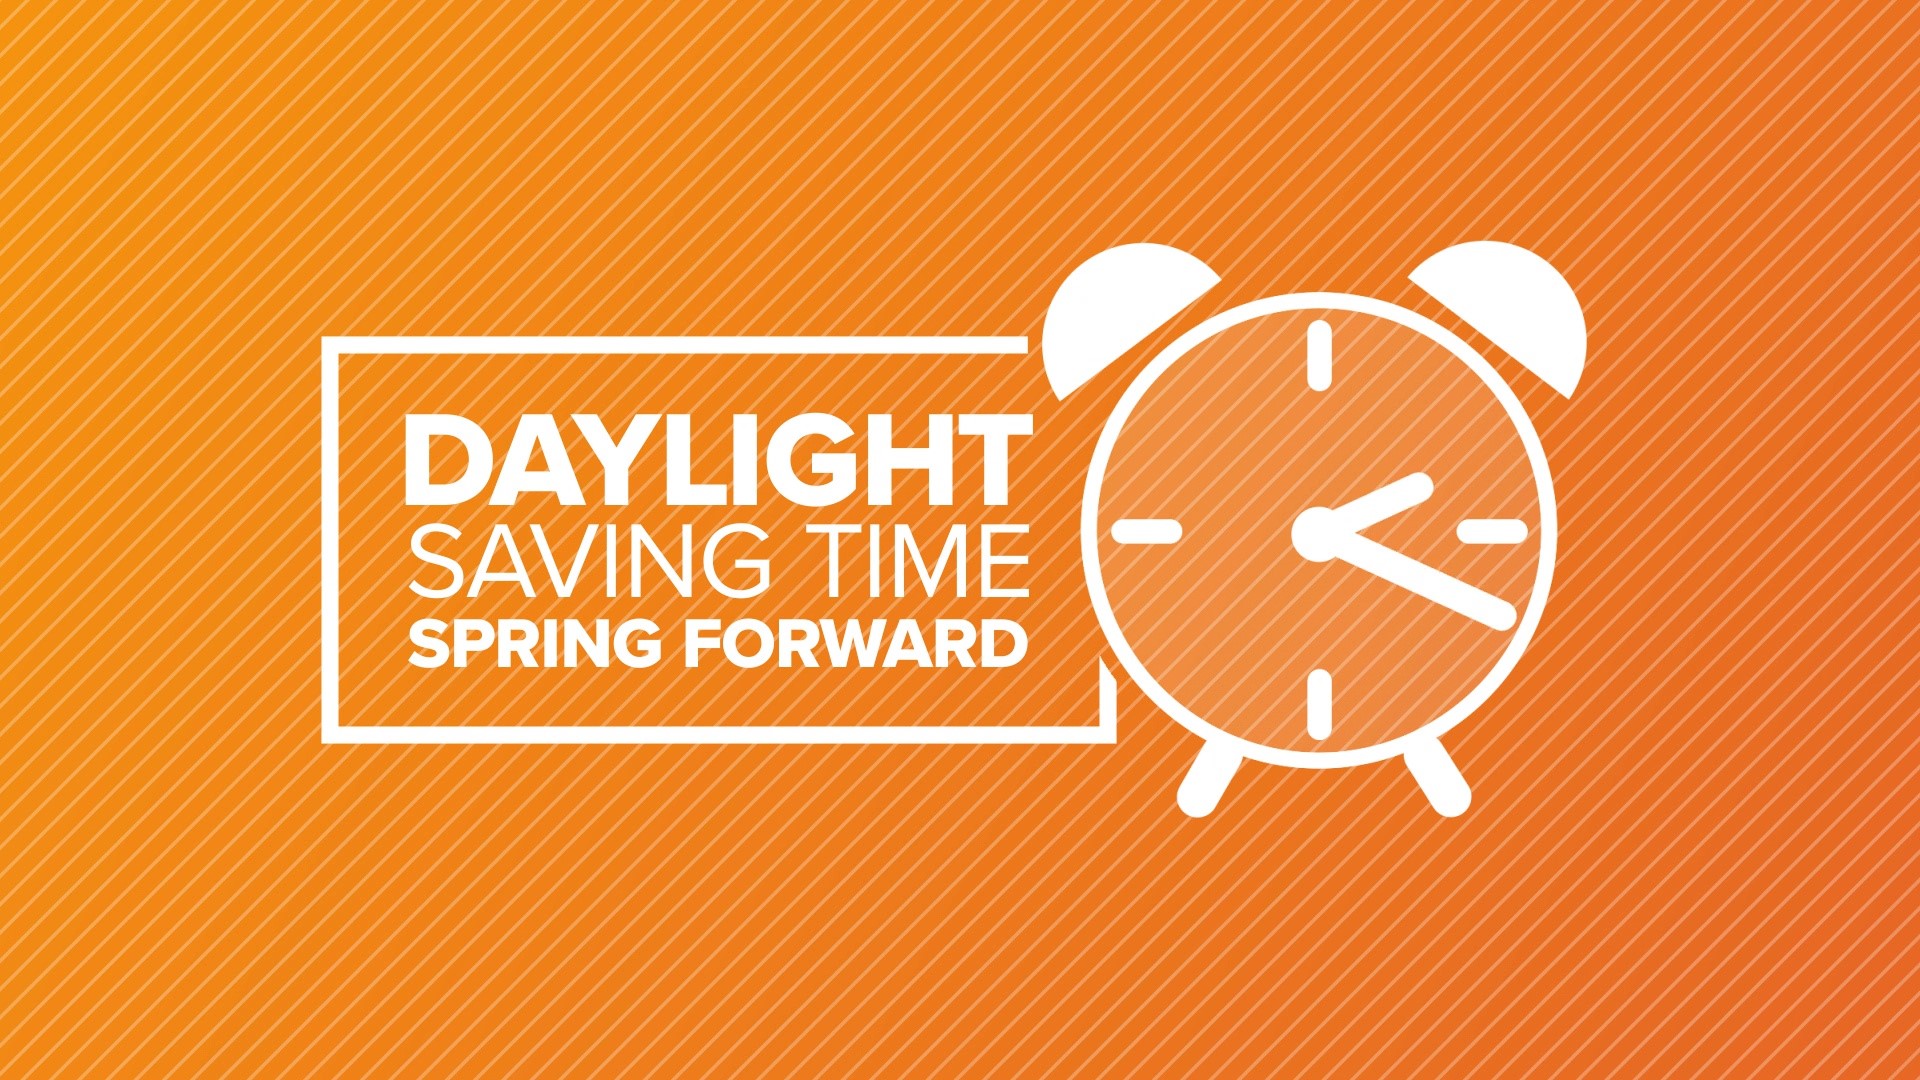 Is turning the clocks back and forth doomed to become a thing of the past? And if so, which system should we stick with — Standard or Daylight Saving Time?